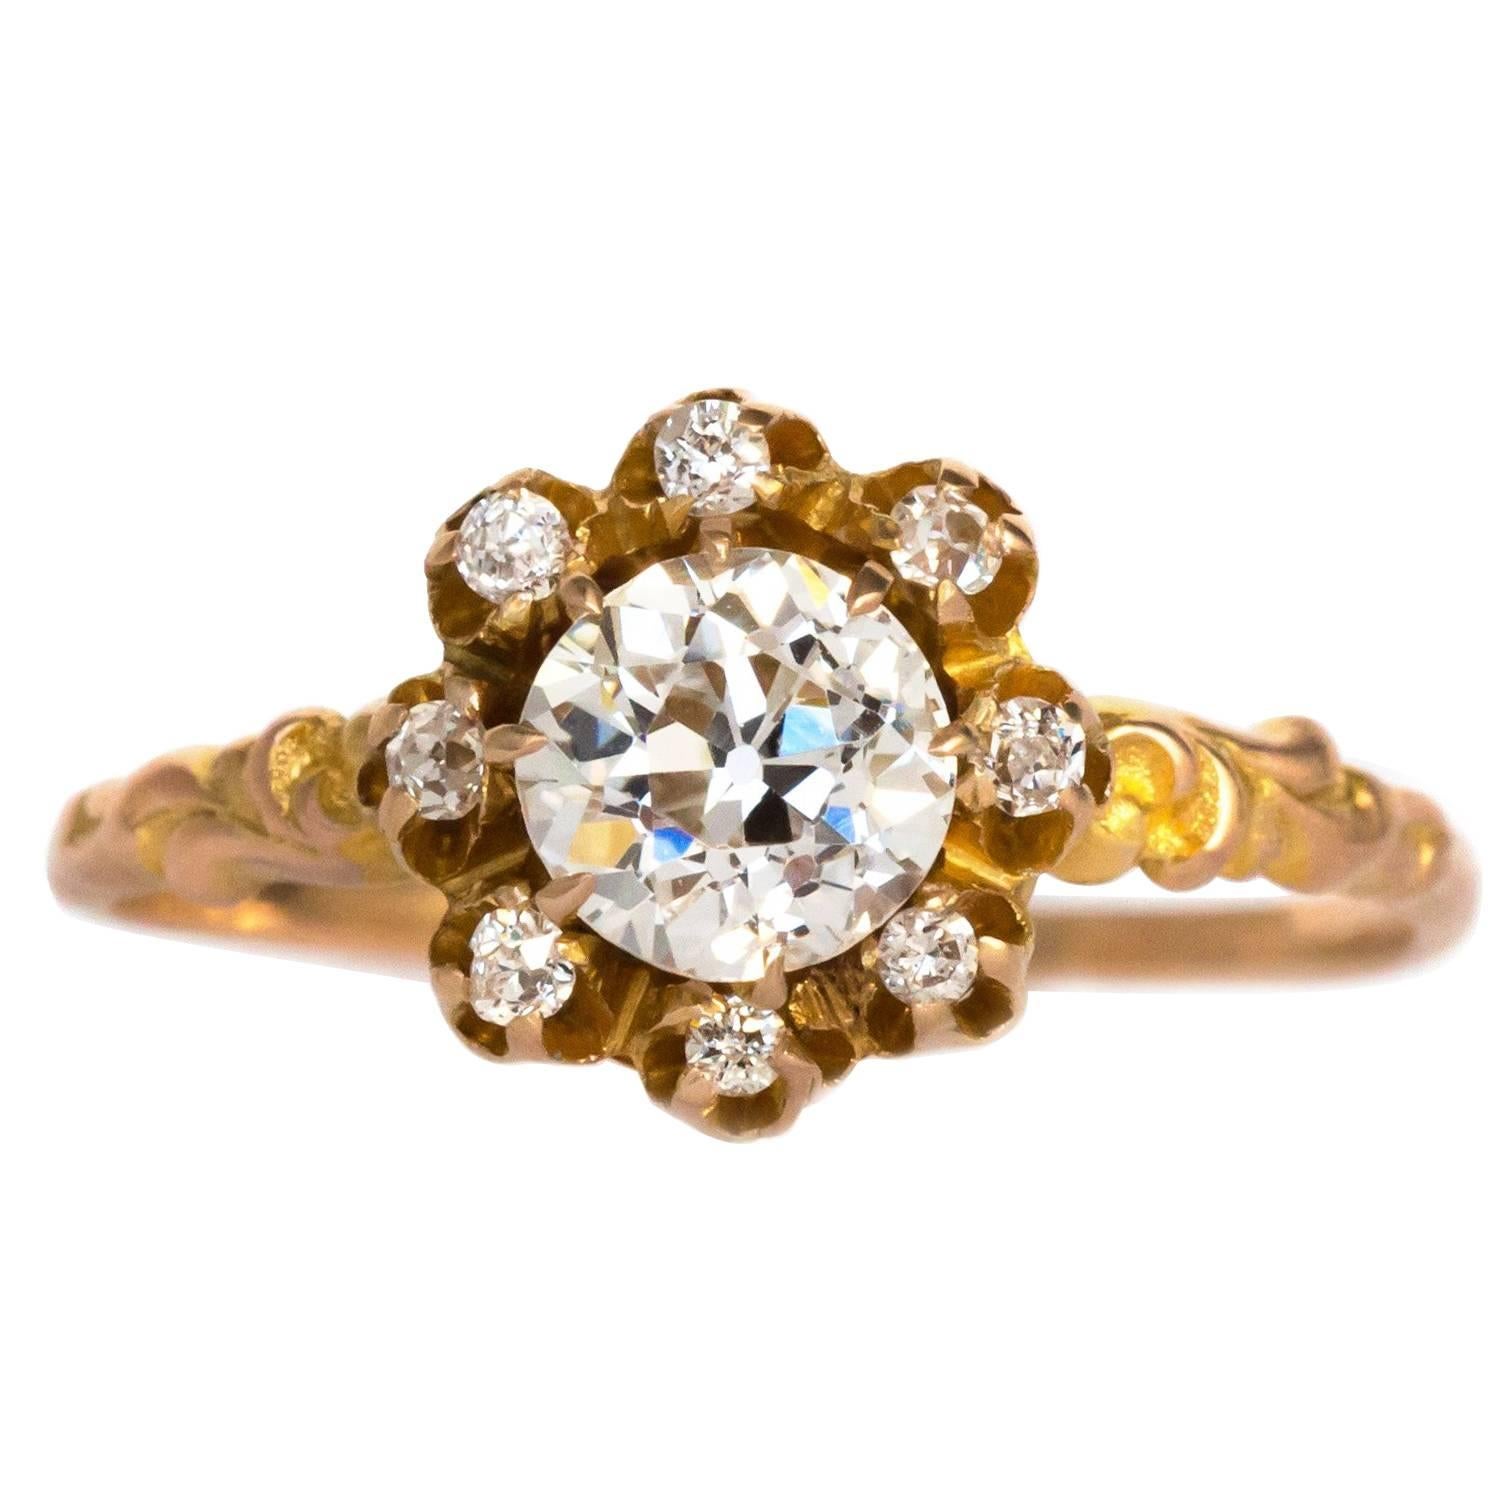 1880s Victorian Yellow Gold GIA Certified .69 Carat Diamond Engagement Ring